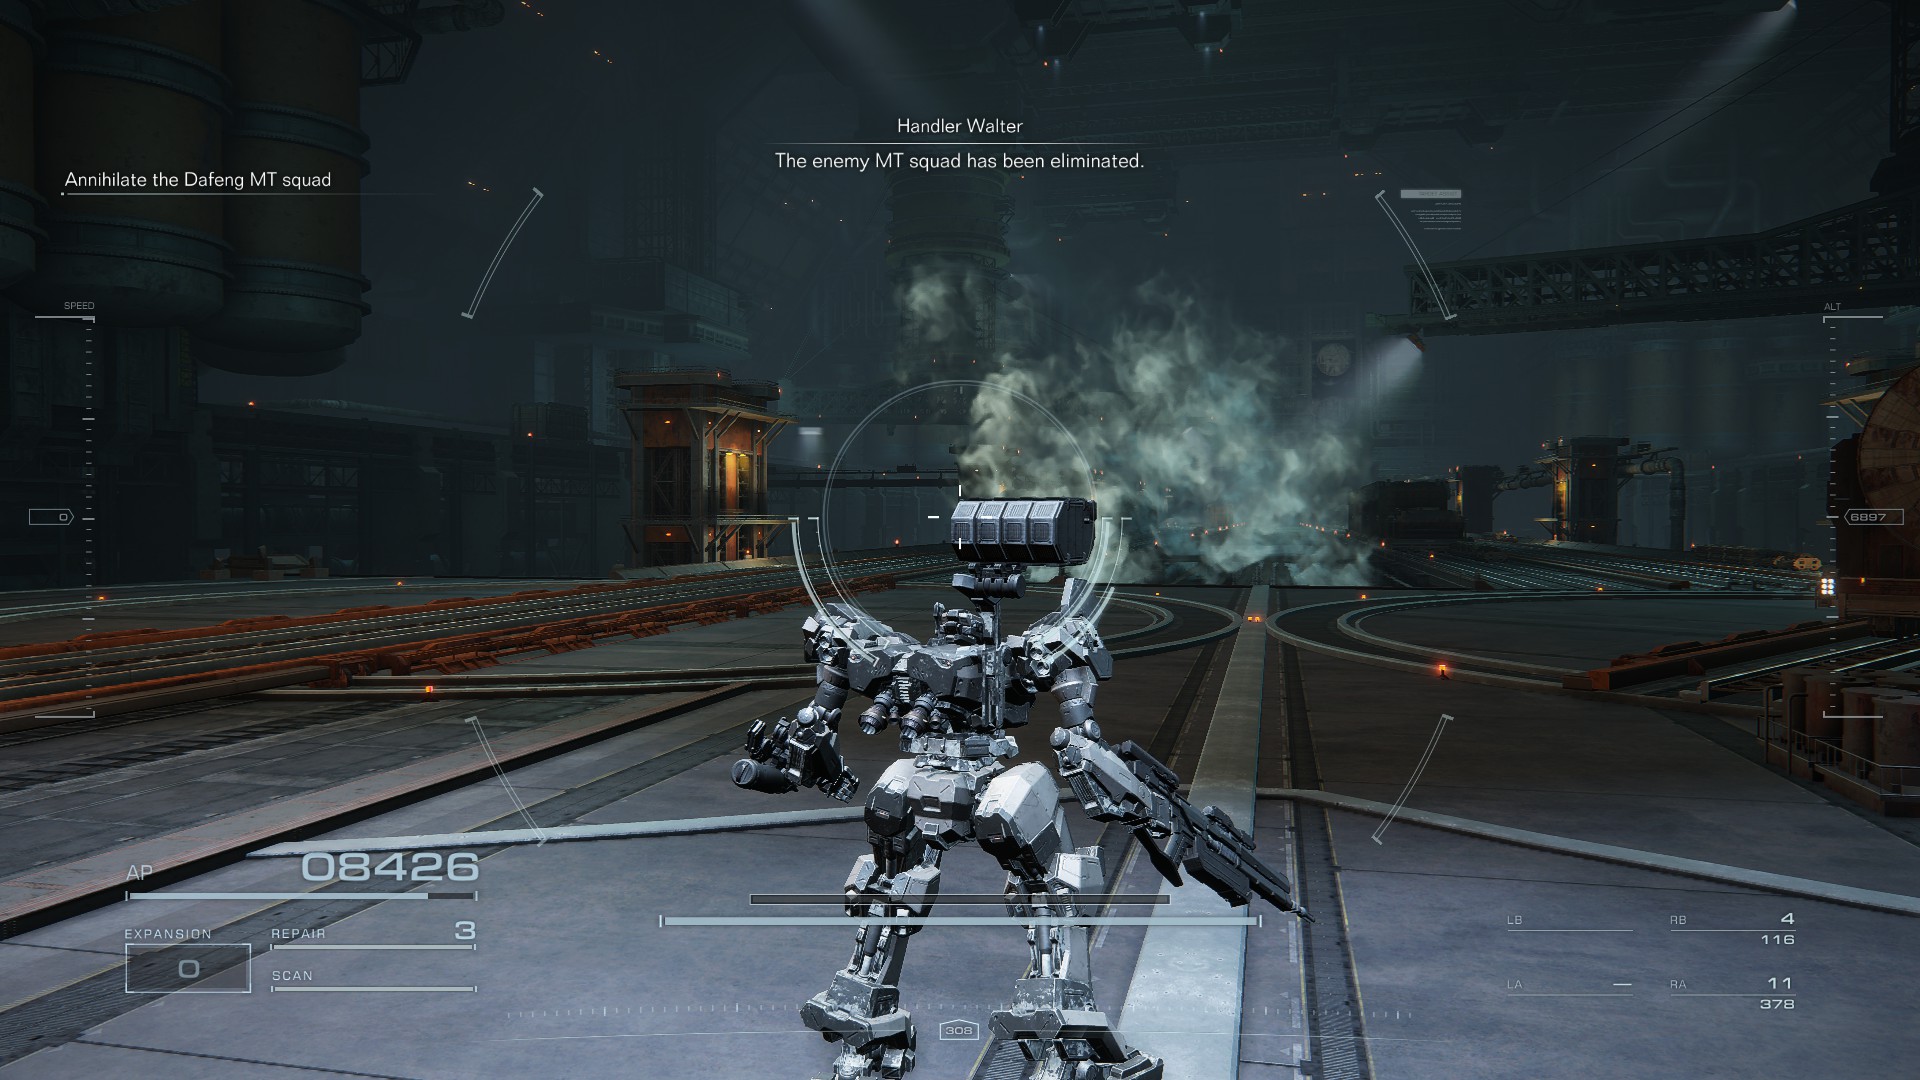 From Software confirms it is investigating an Armored Core 6 PC